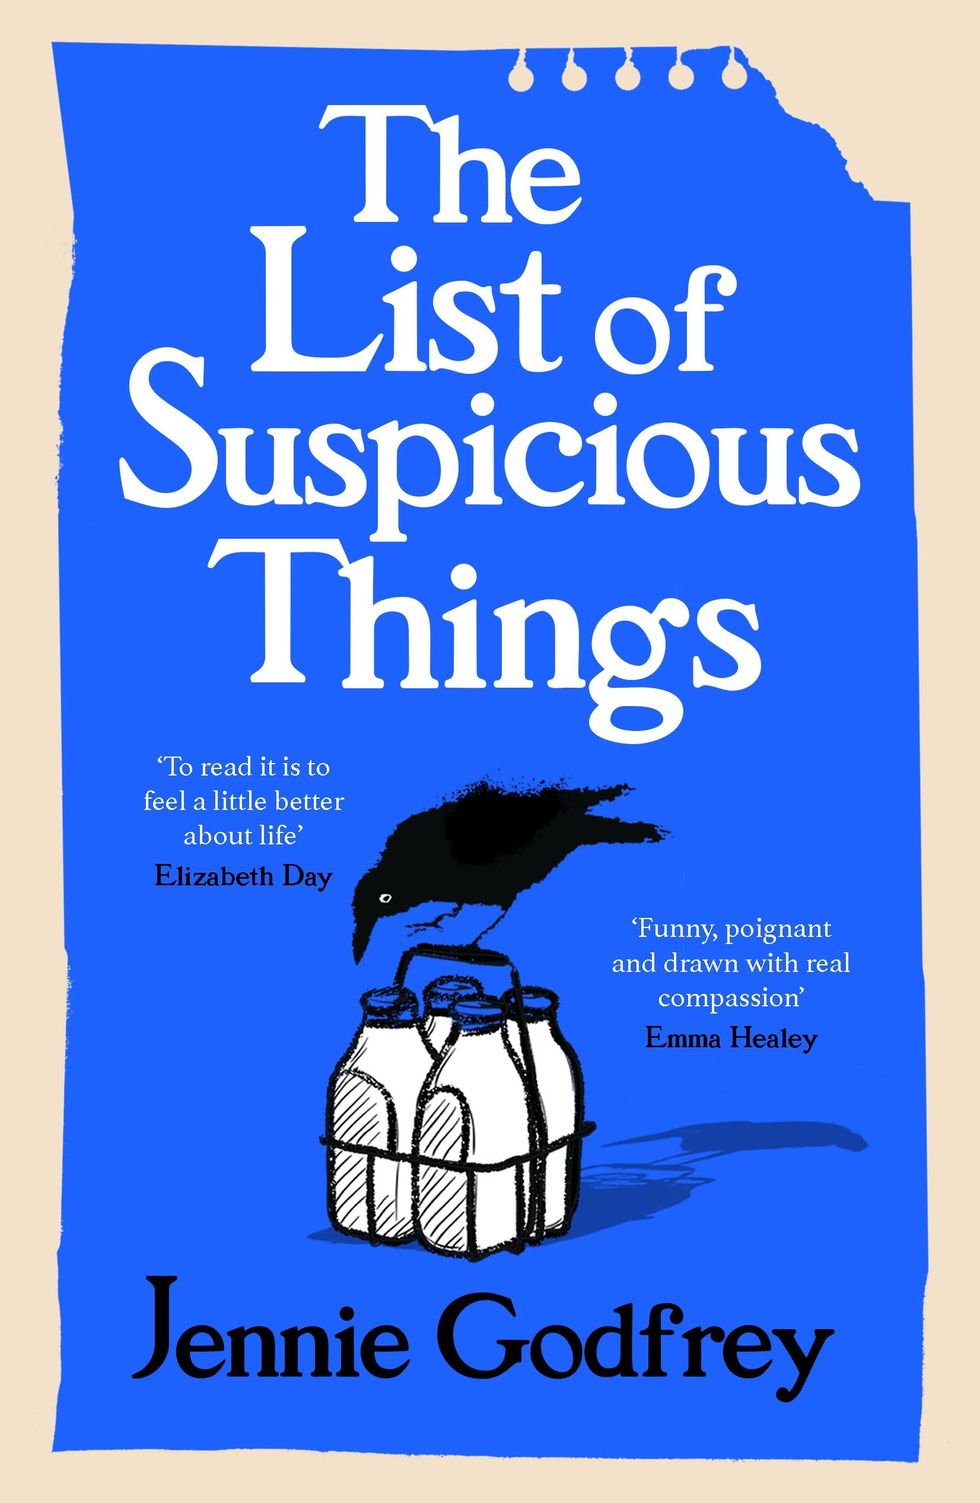 The List of Suspicious Things by Jennie Godfrey